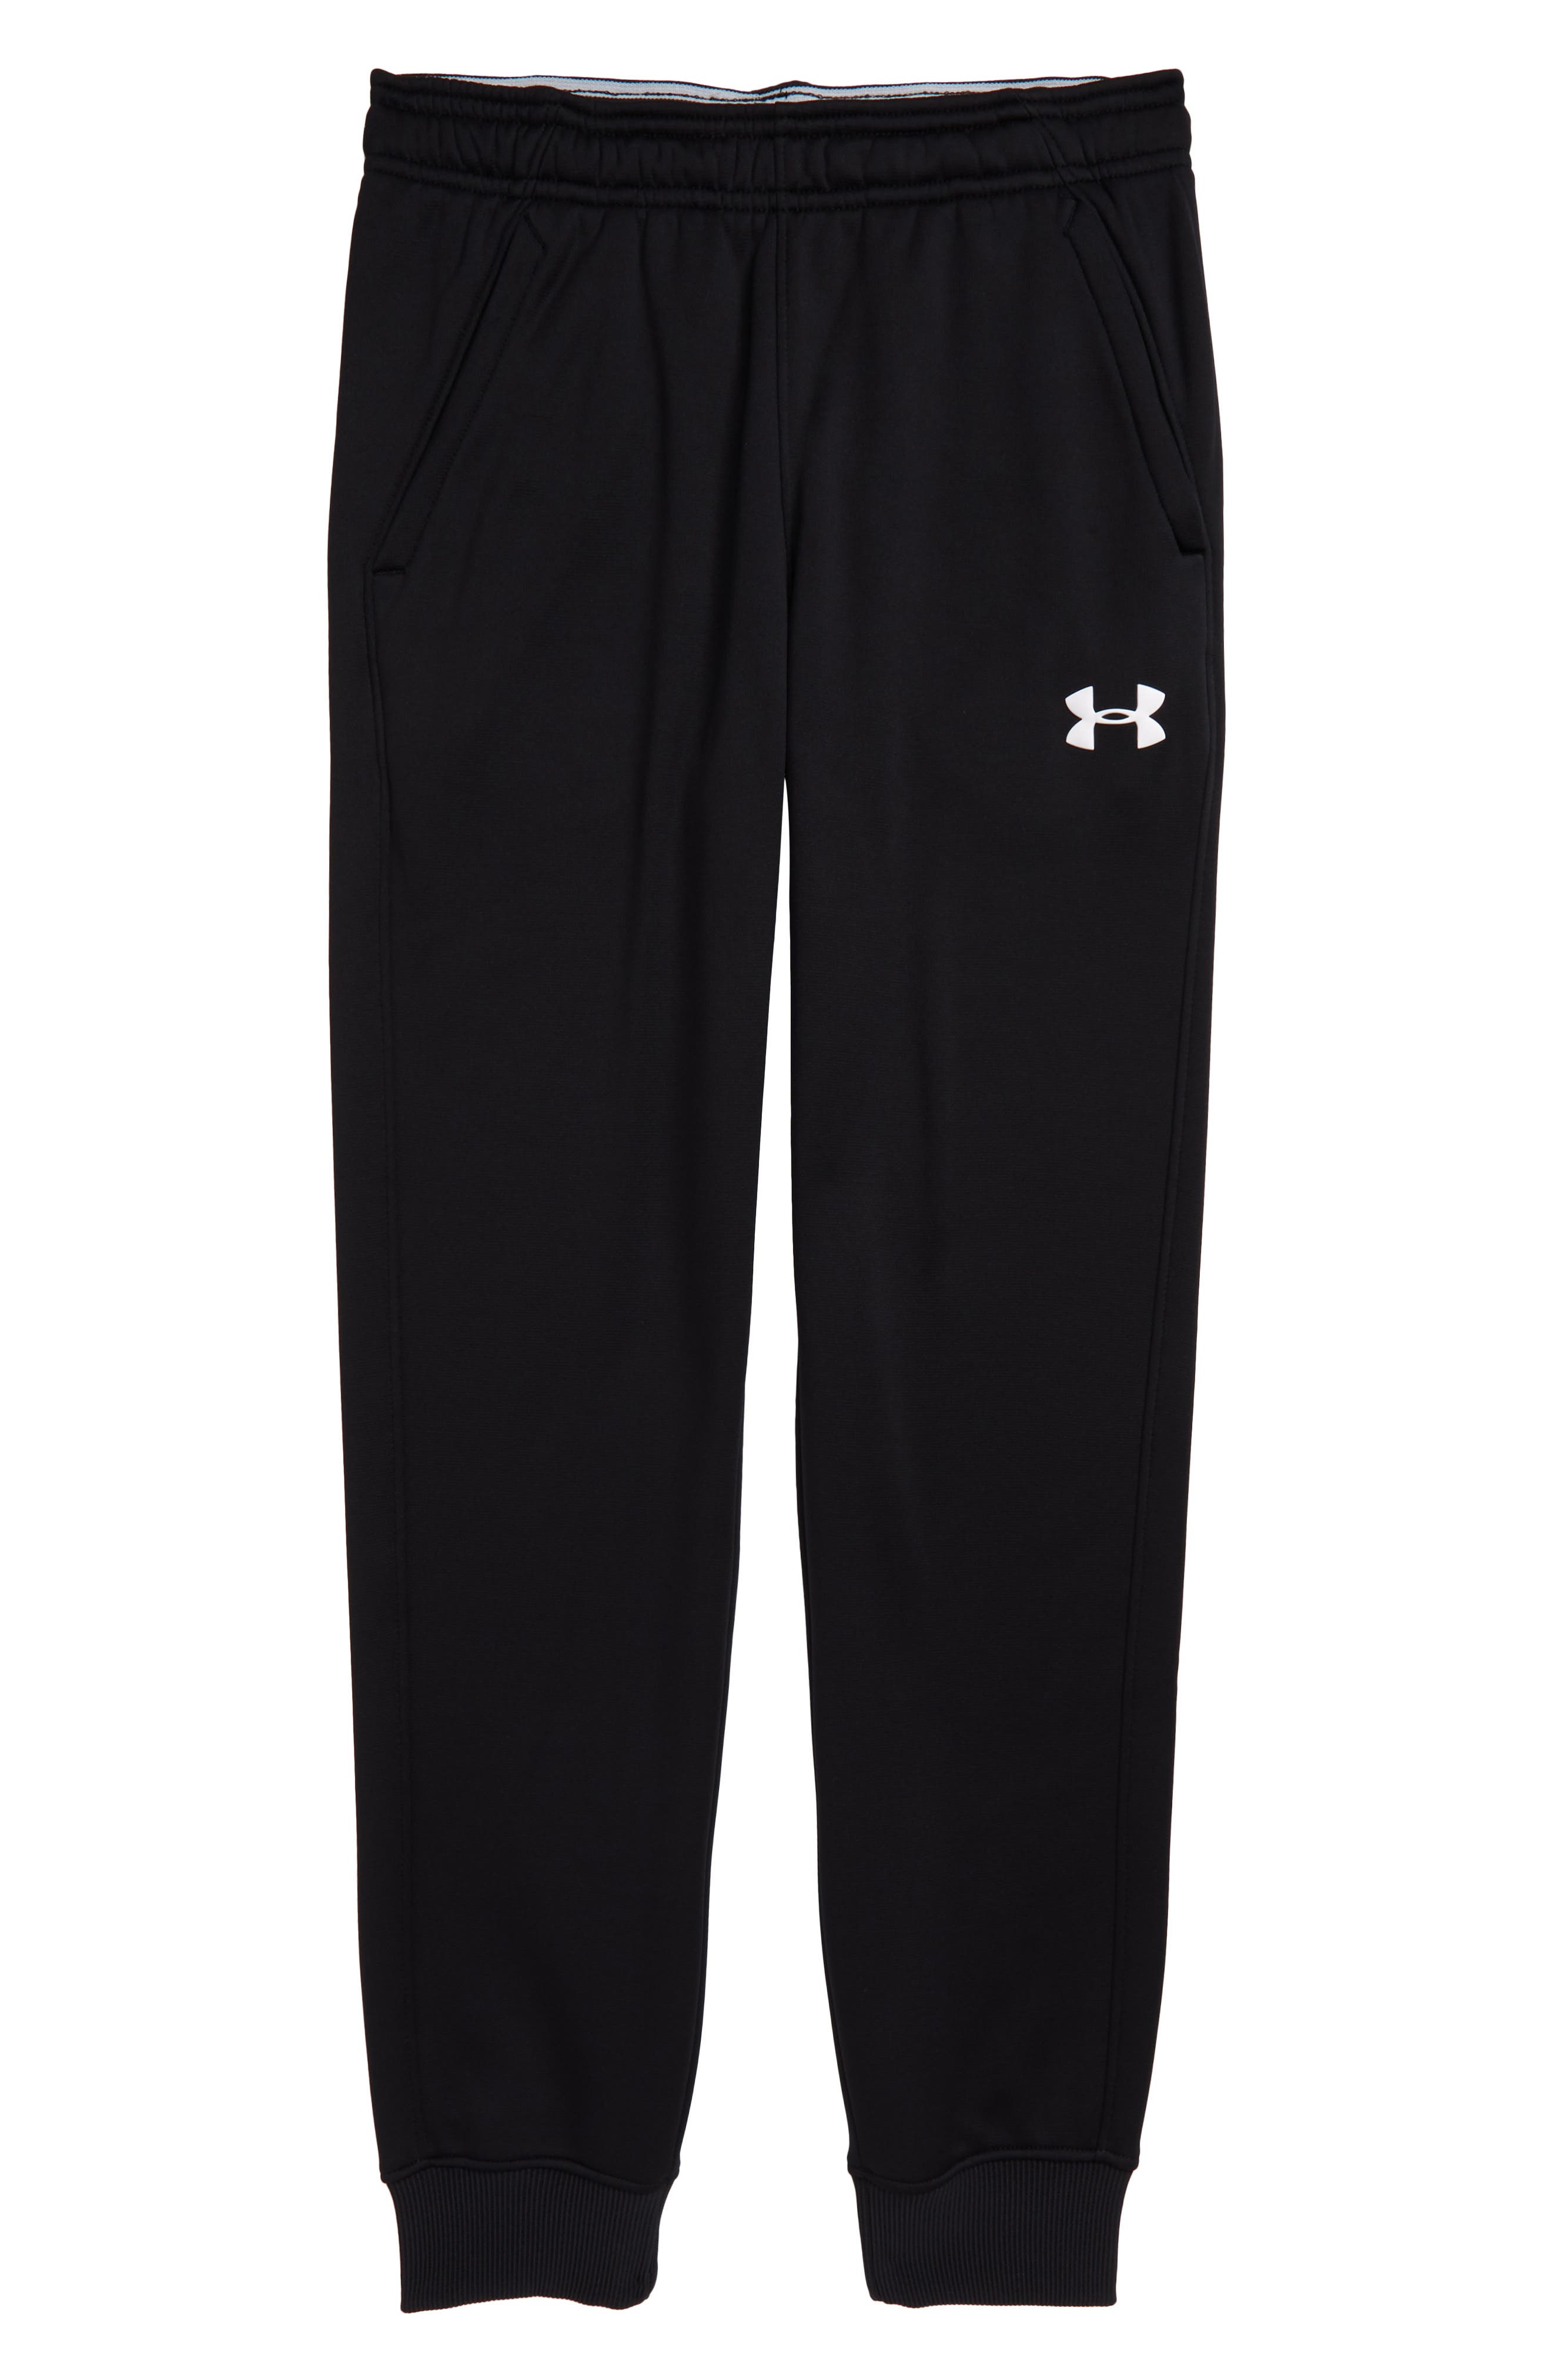 under armour youth coldgear pants